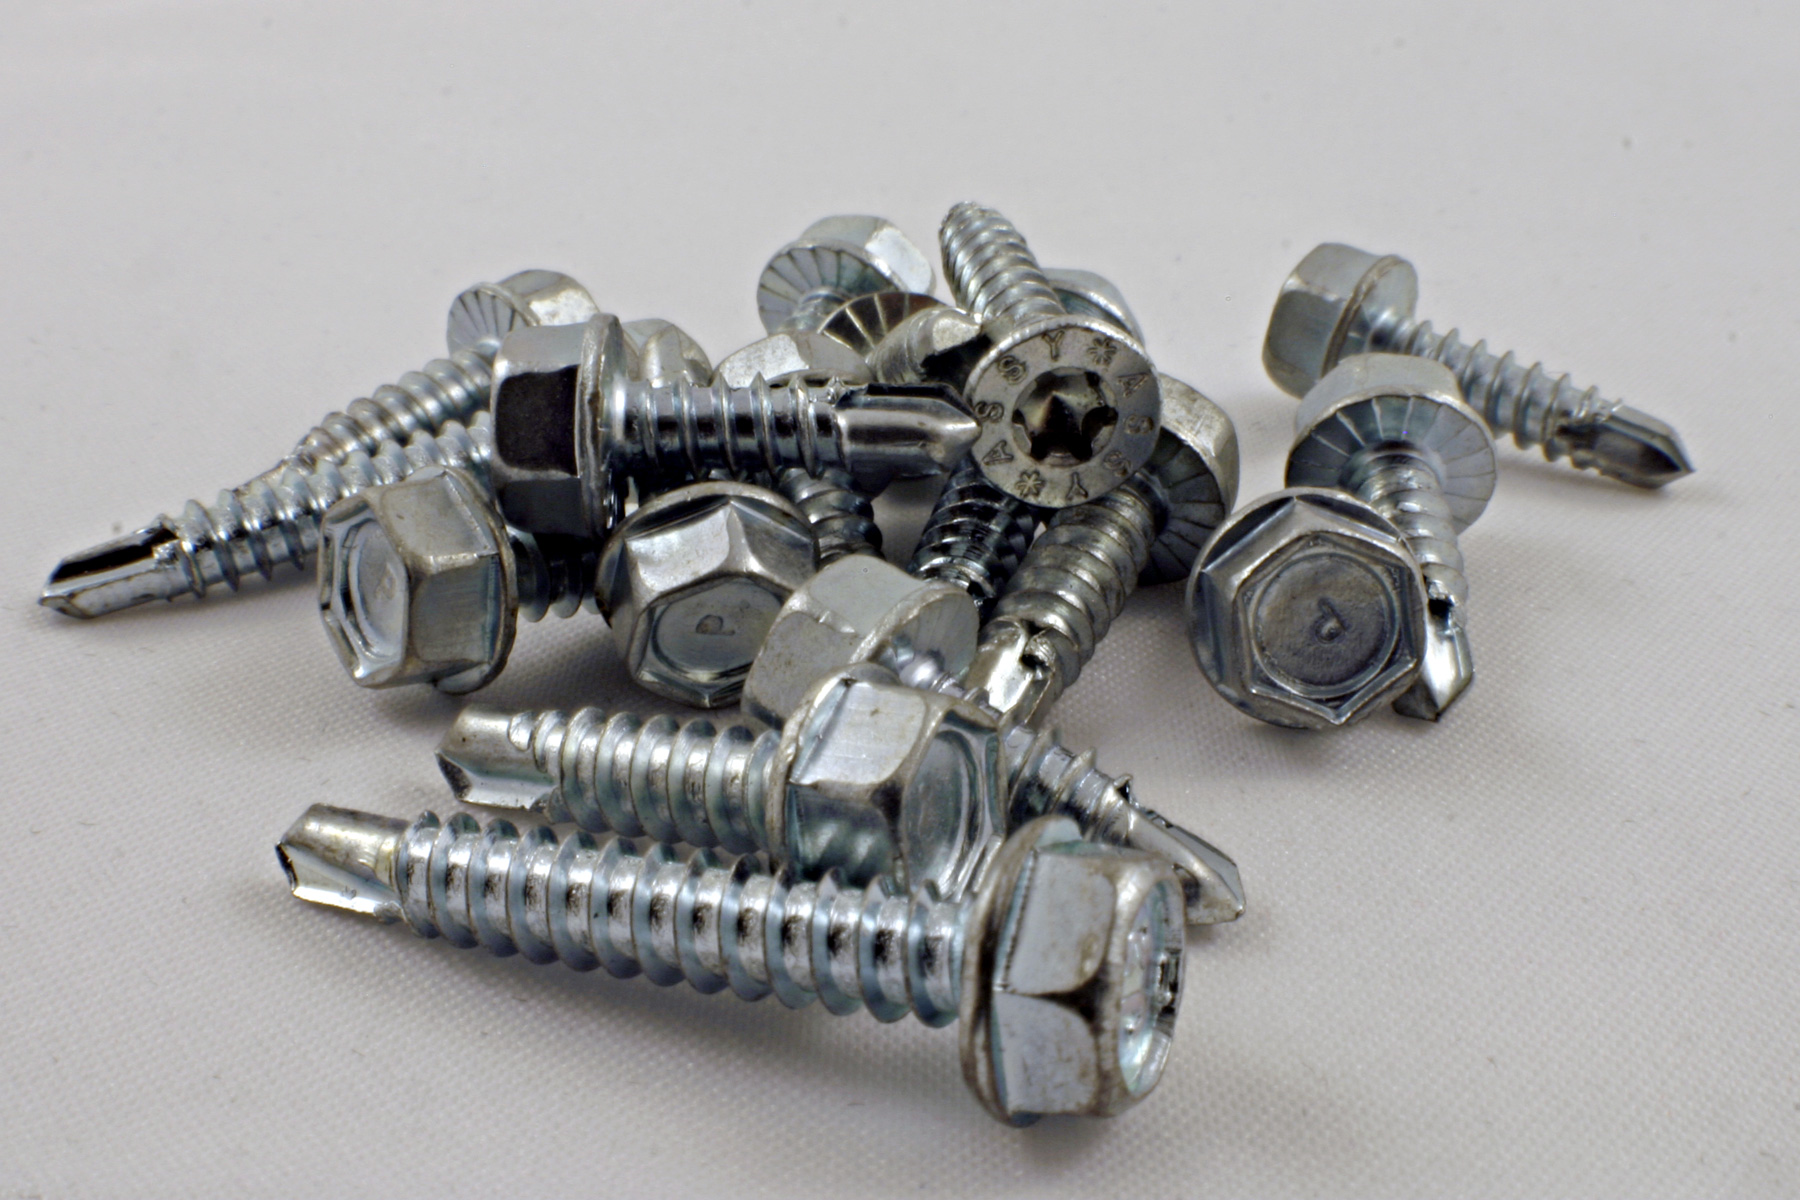 A pile of drill screws photo